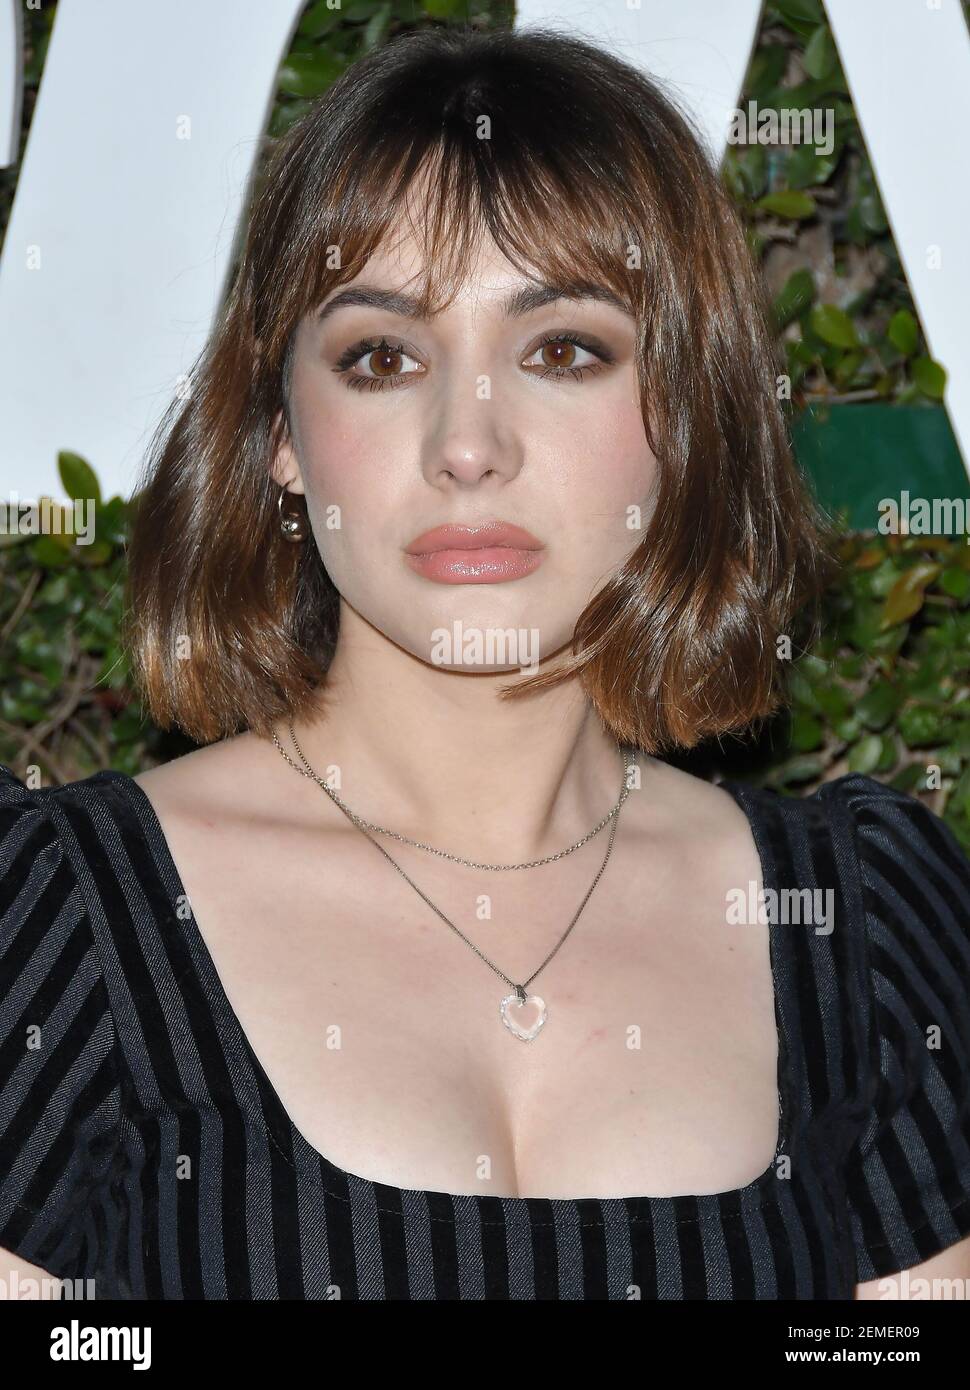 Hannah Marks Arrives At Teen Vogue S 19 Young Hollywood Party Held At The Los Angeles Theatre In Los Angeles Ca On Friday February 15 19 Photo By Sthanlee B Mirador Sipa Usa Stock